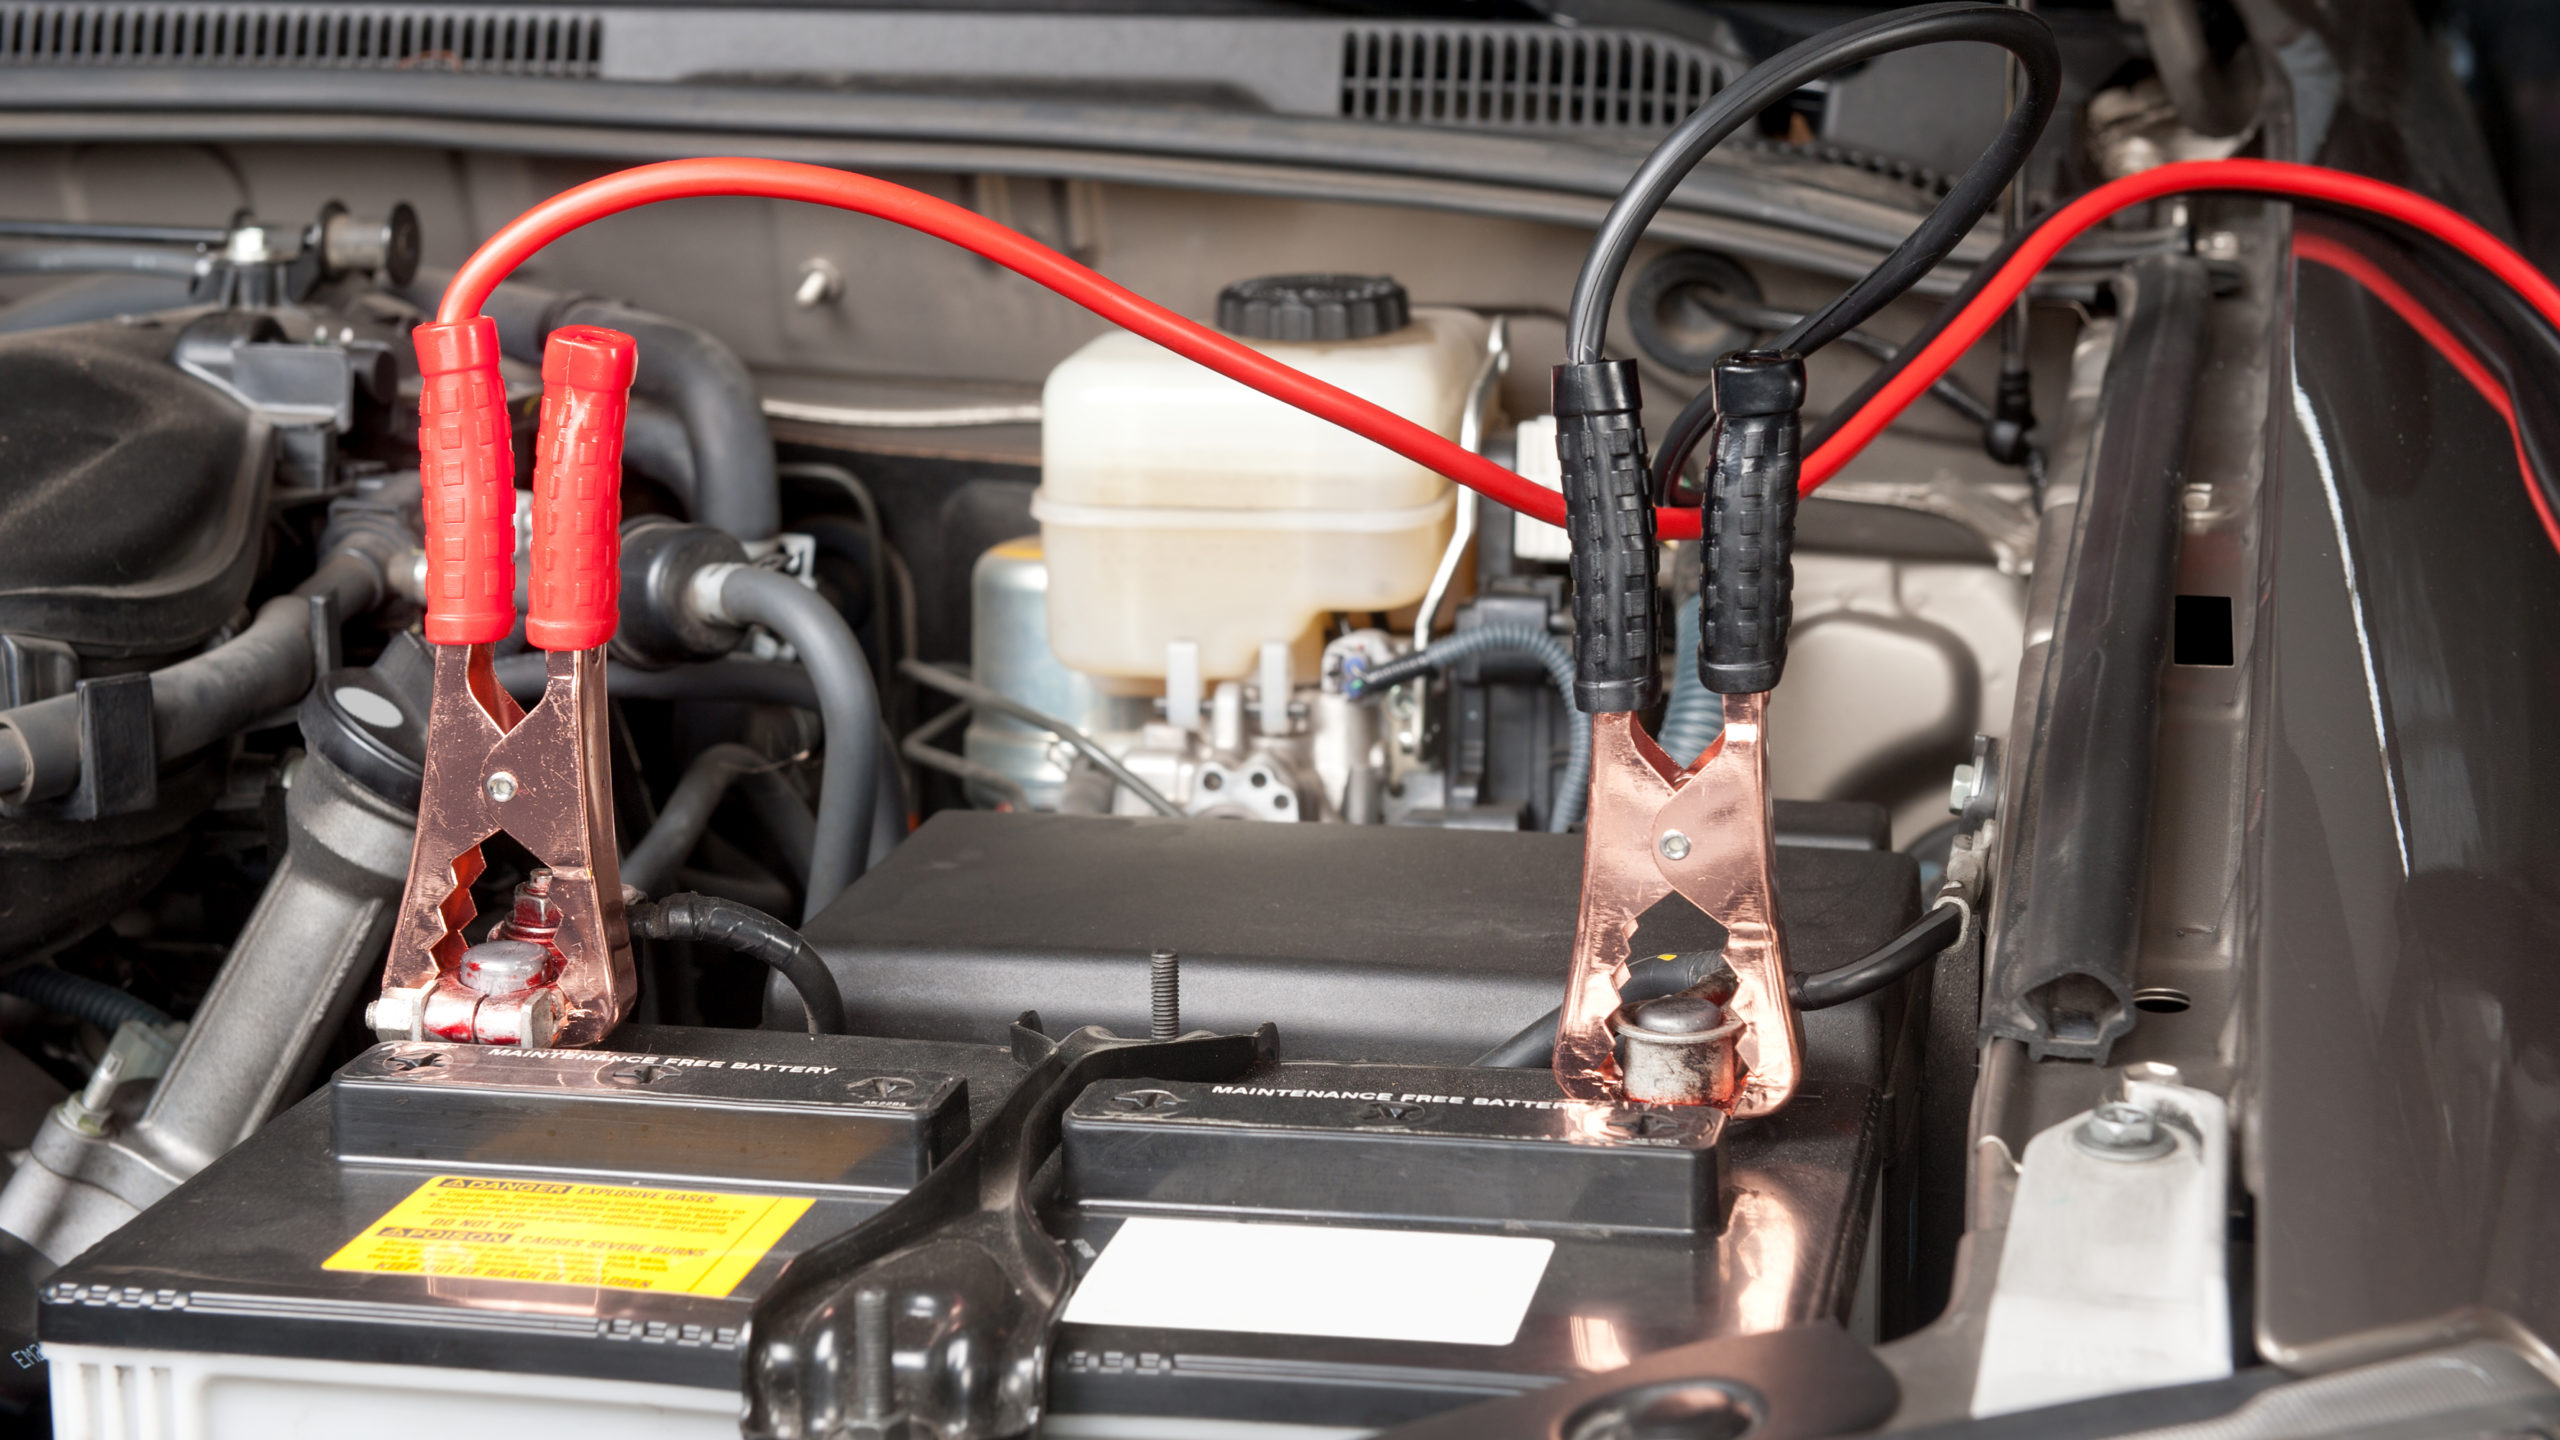 How to Remove Jumper Cables After Car Starts?